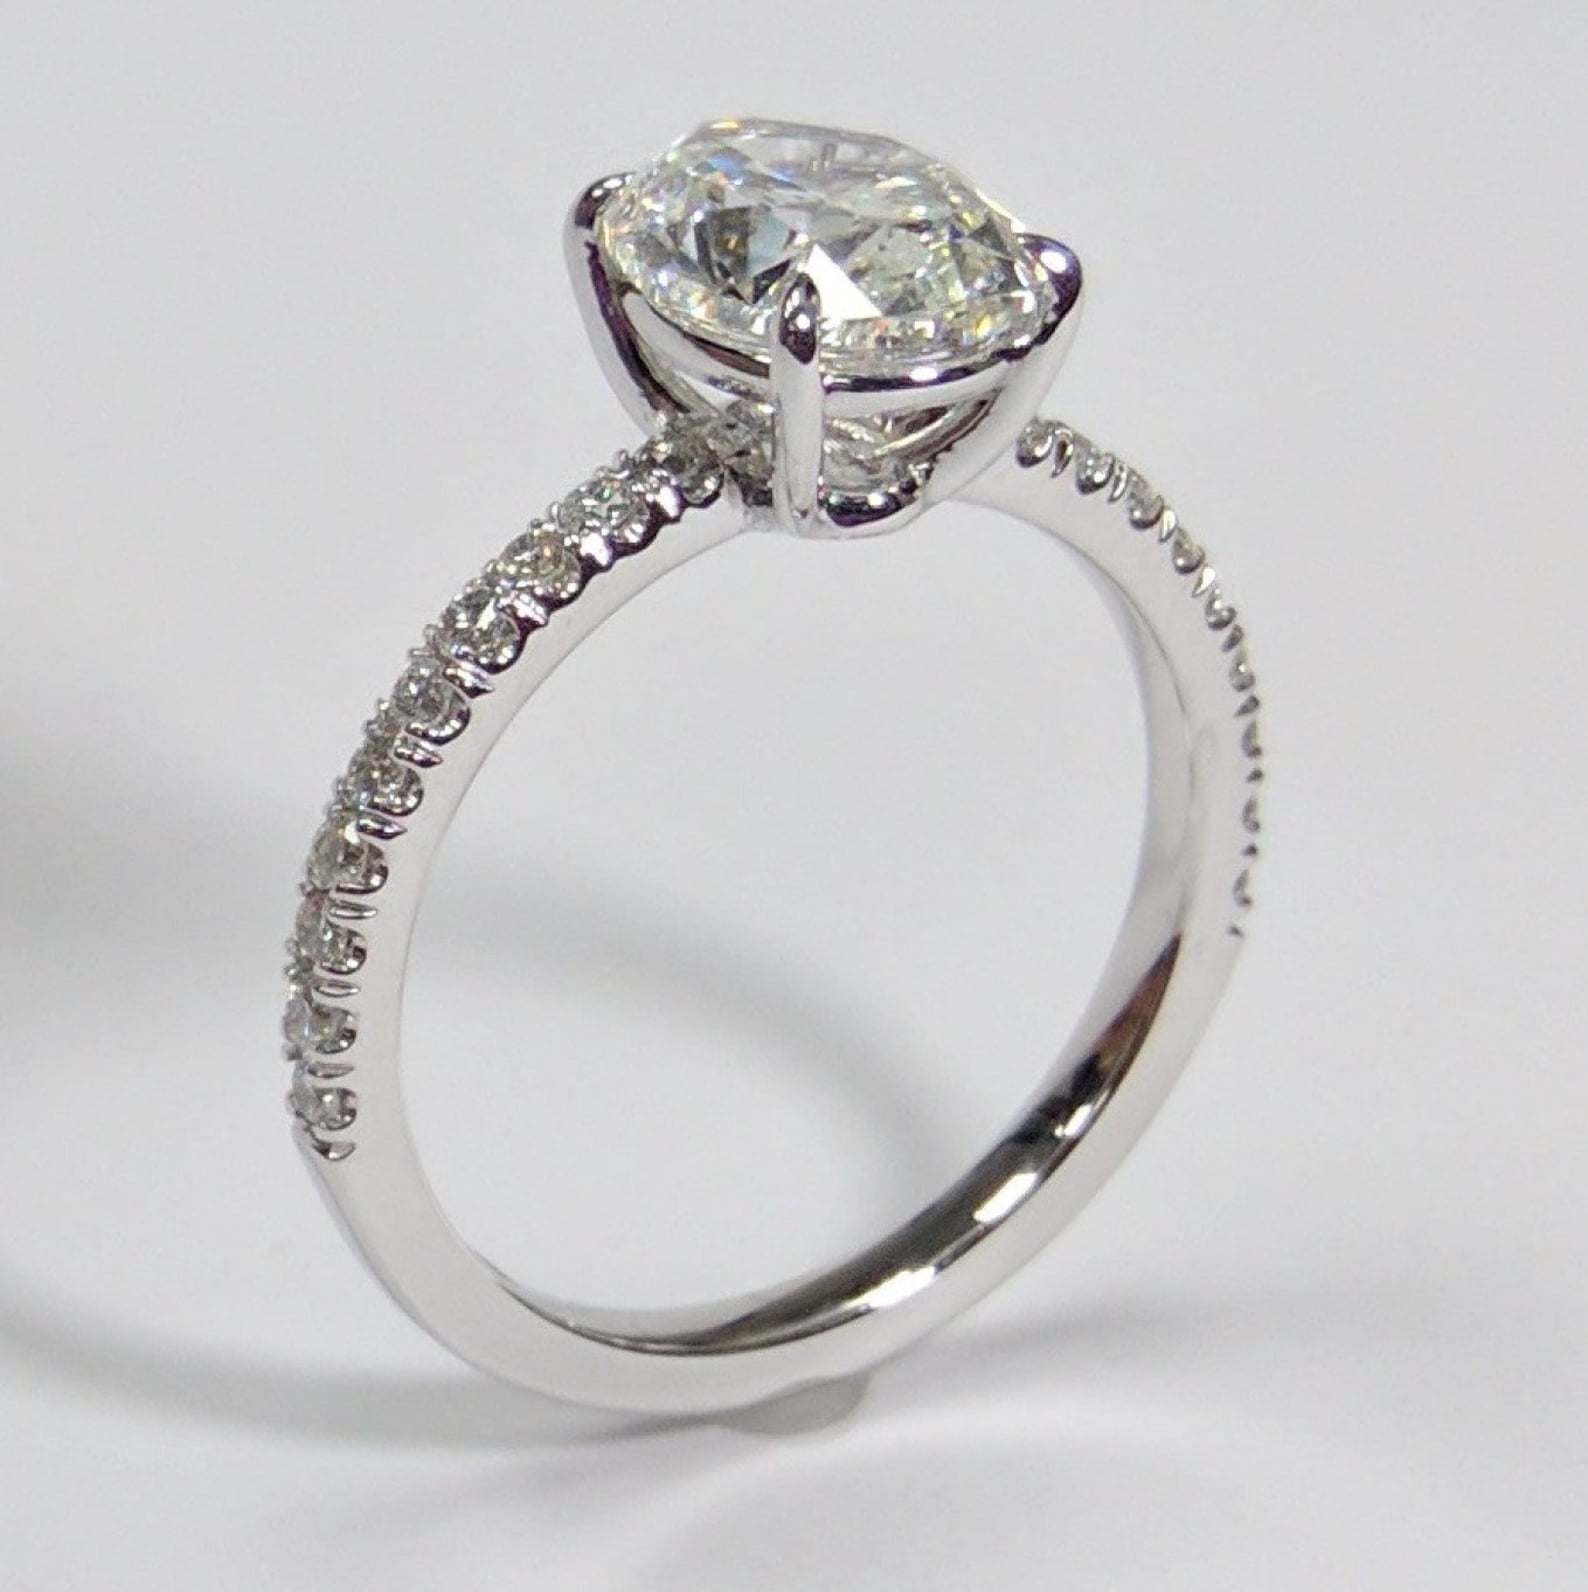 Delicate Low Profile Oval Diamond Engagement Ring 2.15 Carat - Etsy